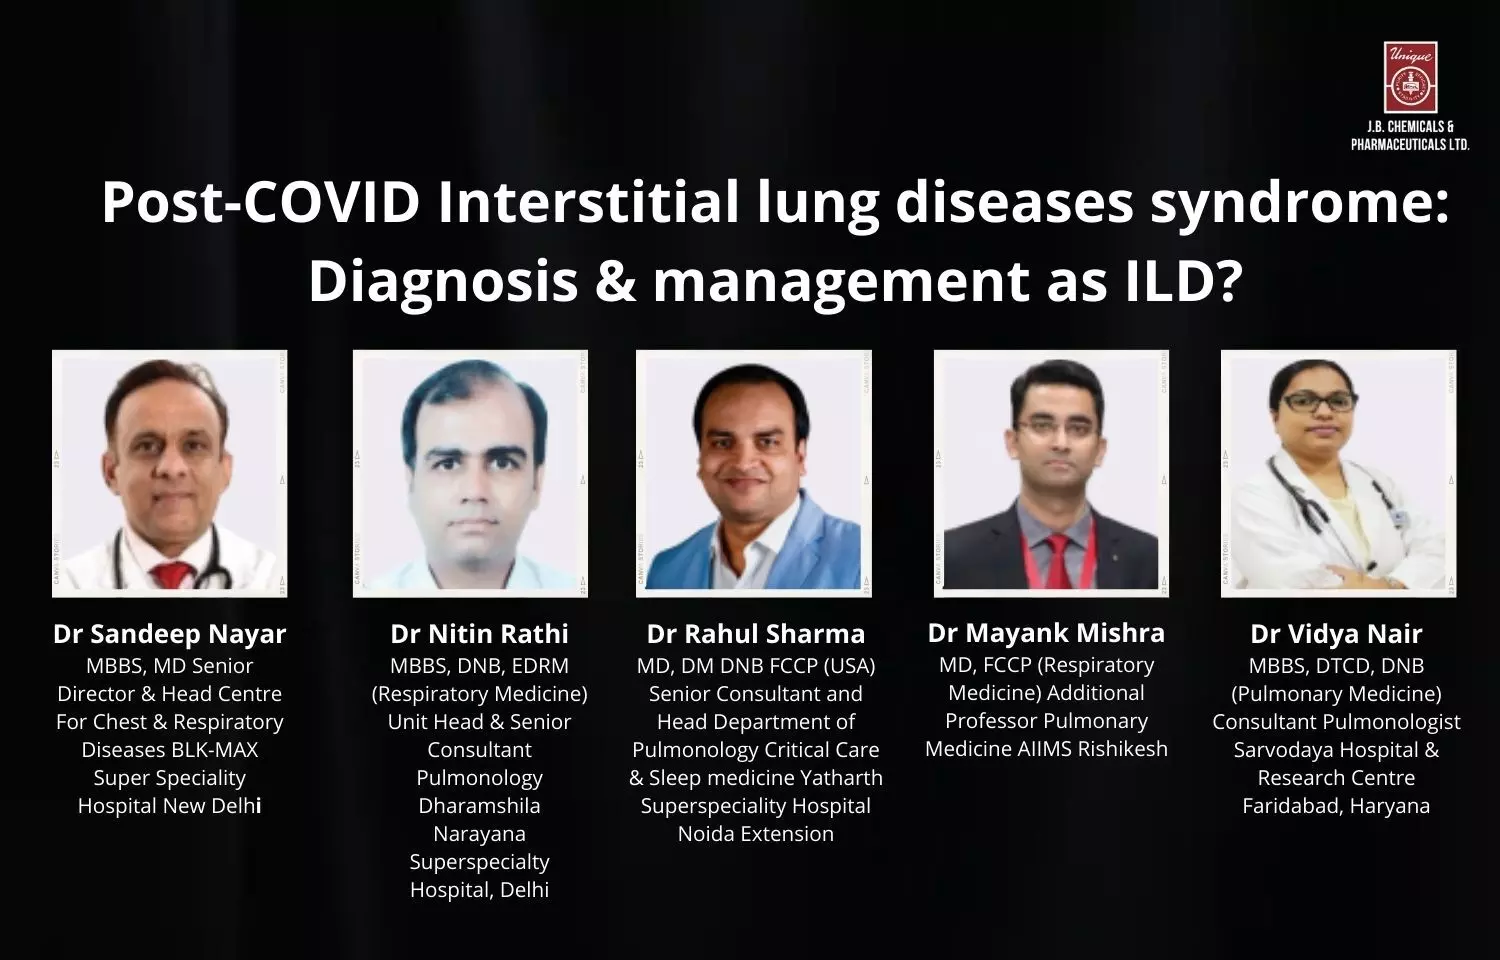 Post-COVID Interstitial lung diseases syndrome: Diagnosis & management as ILD?